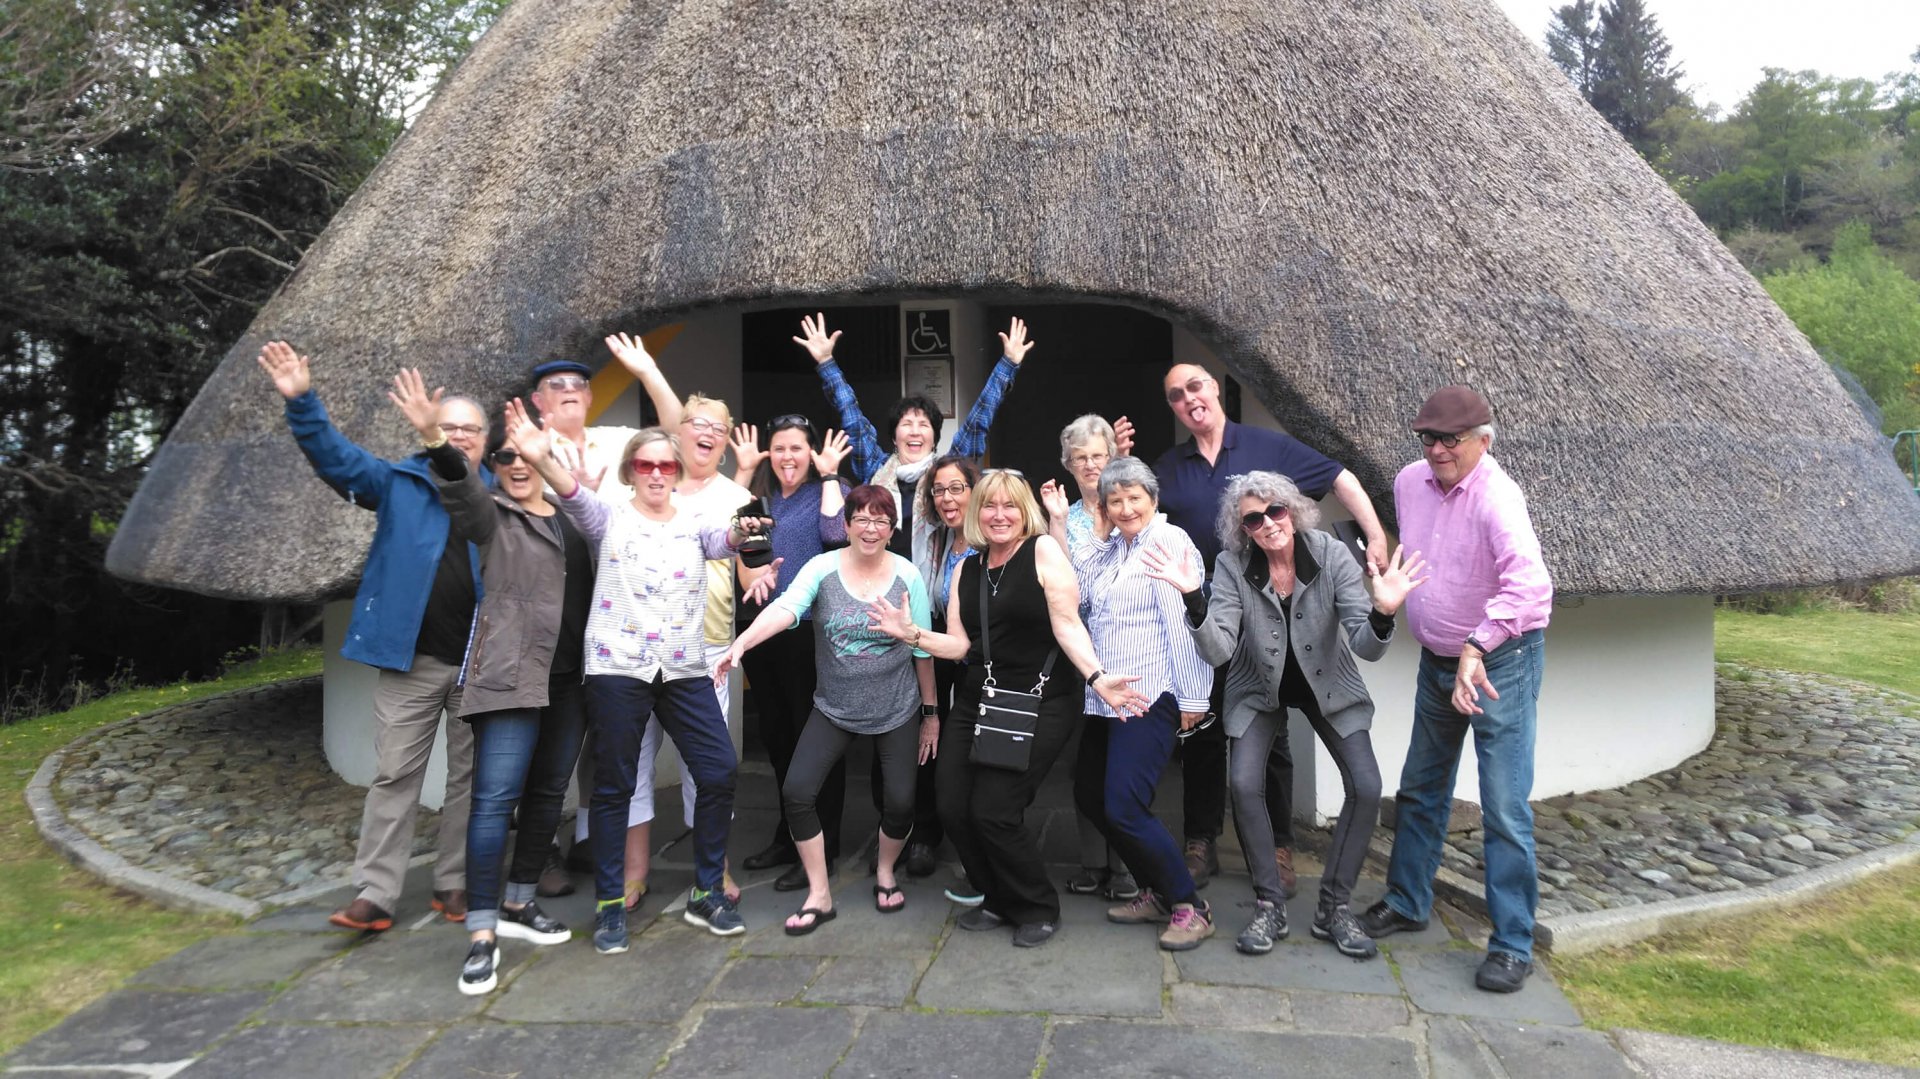 Tour group outside thatched public toilets in Gougane Barra, Ireland